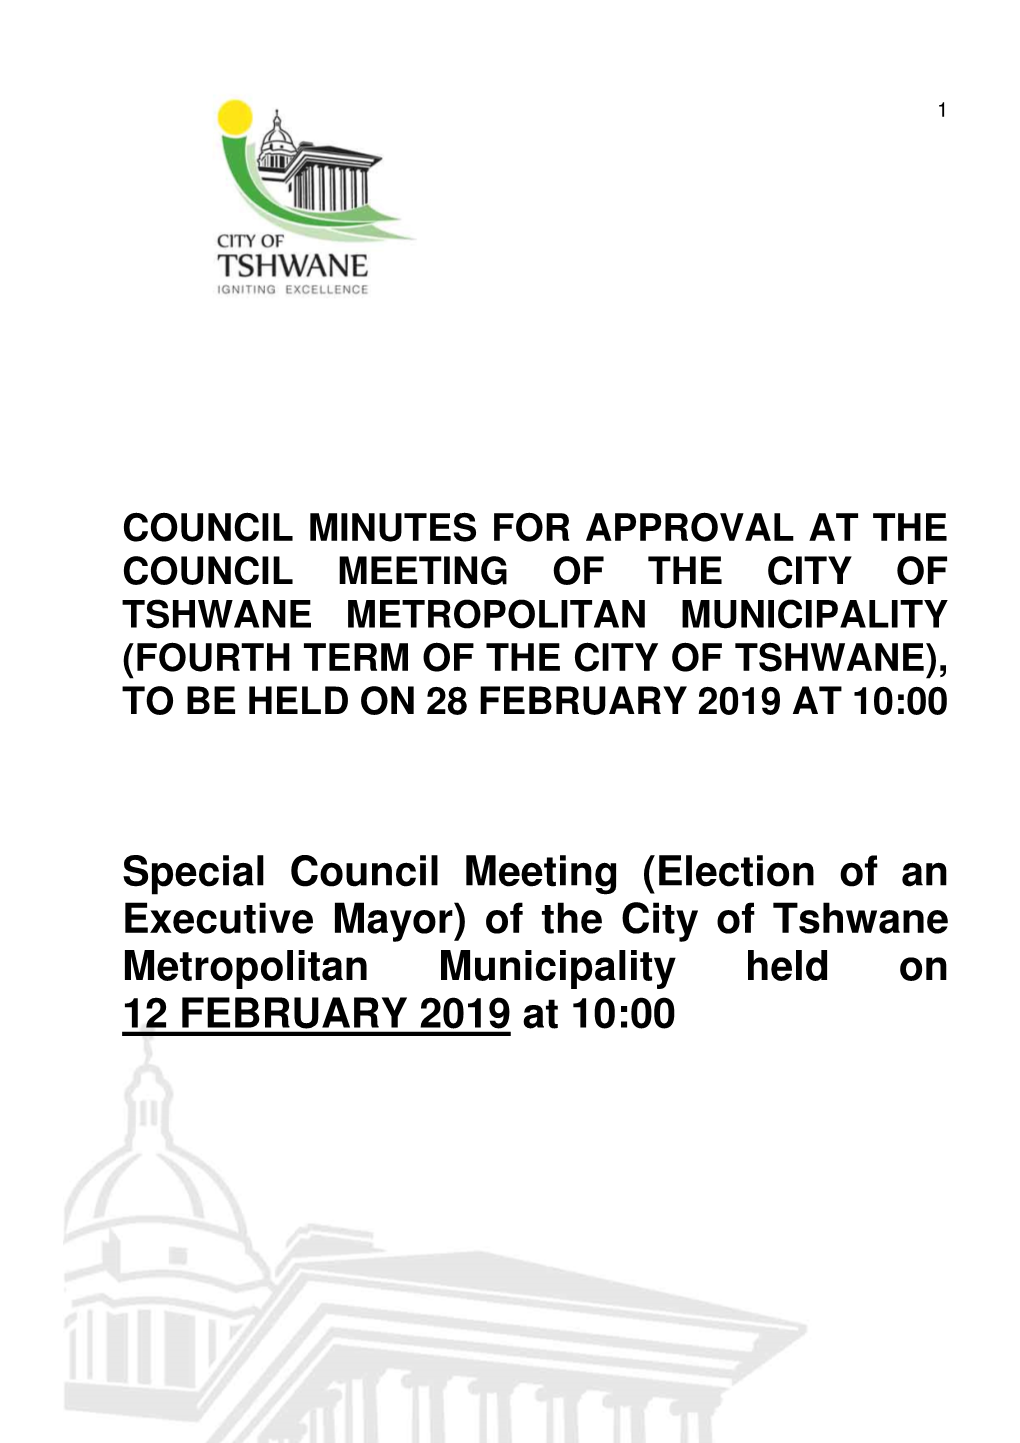 Special Council Meeting (Election of an Executive Mayor) of the City of Tshwane Metropolitan Municipality Held on 12 FEBRUARY 2019 at 10:00